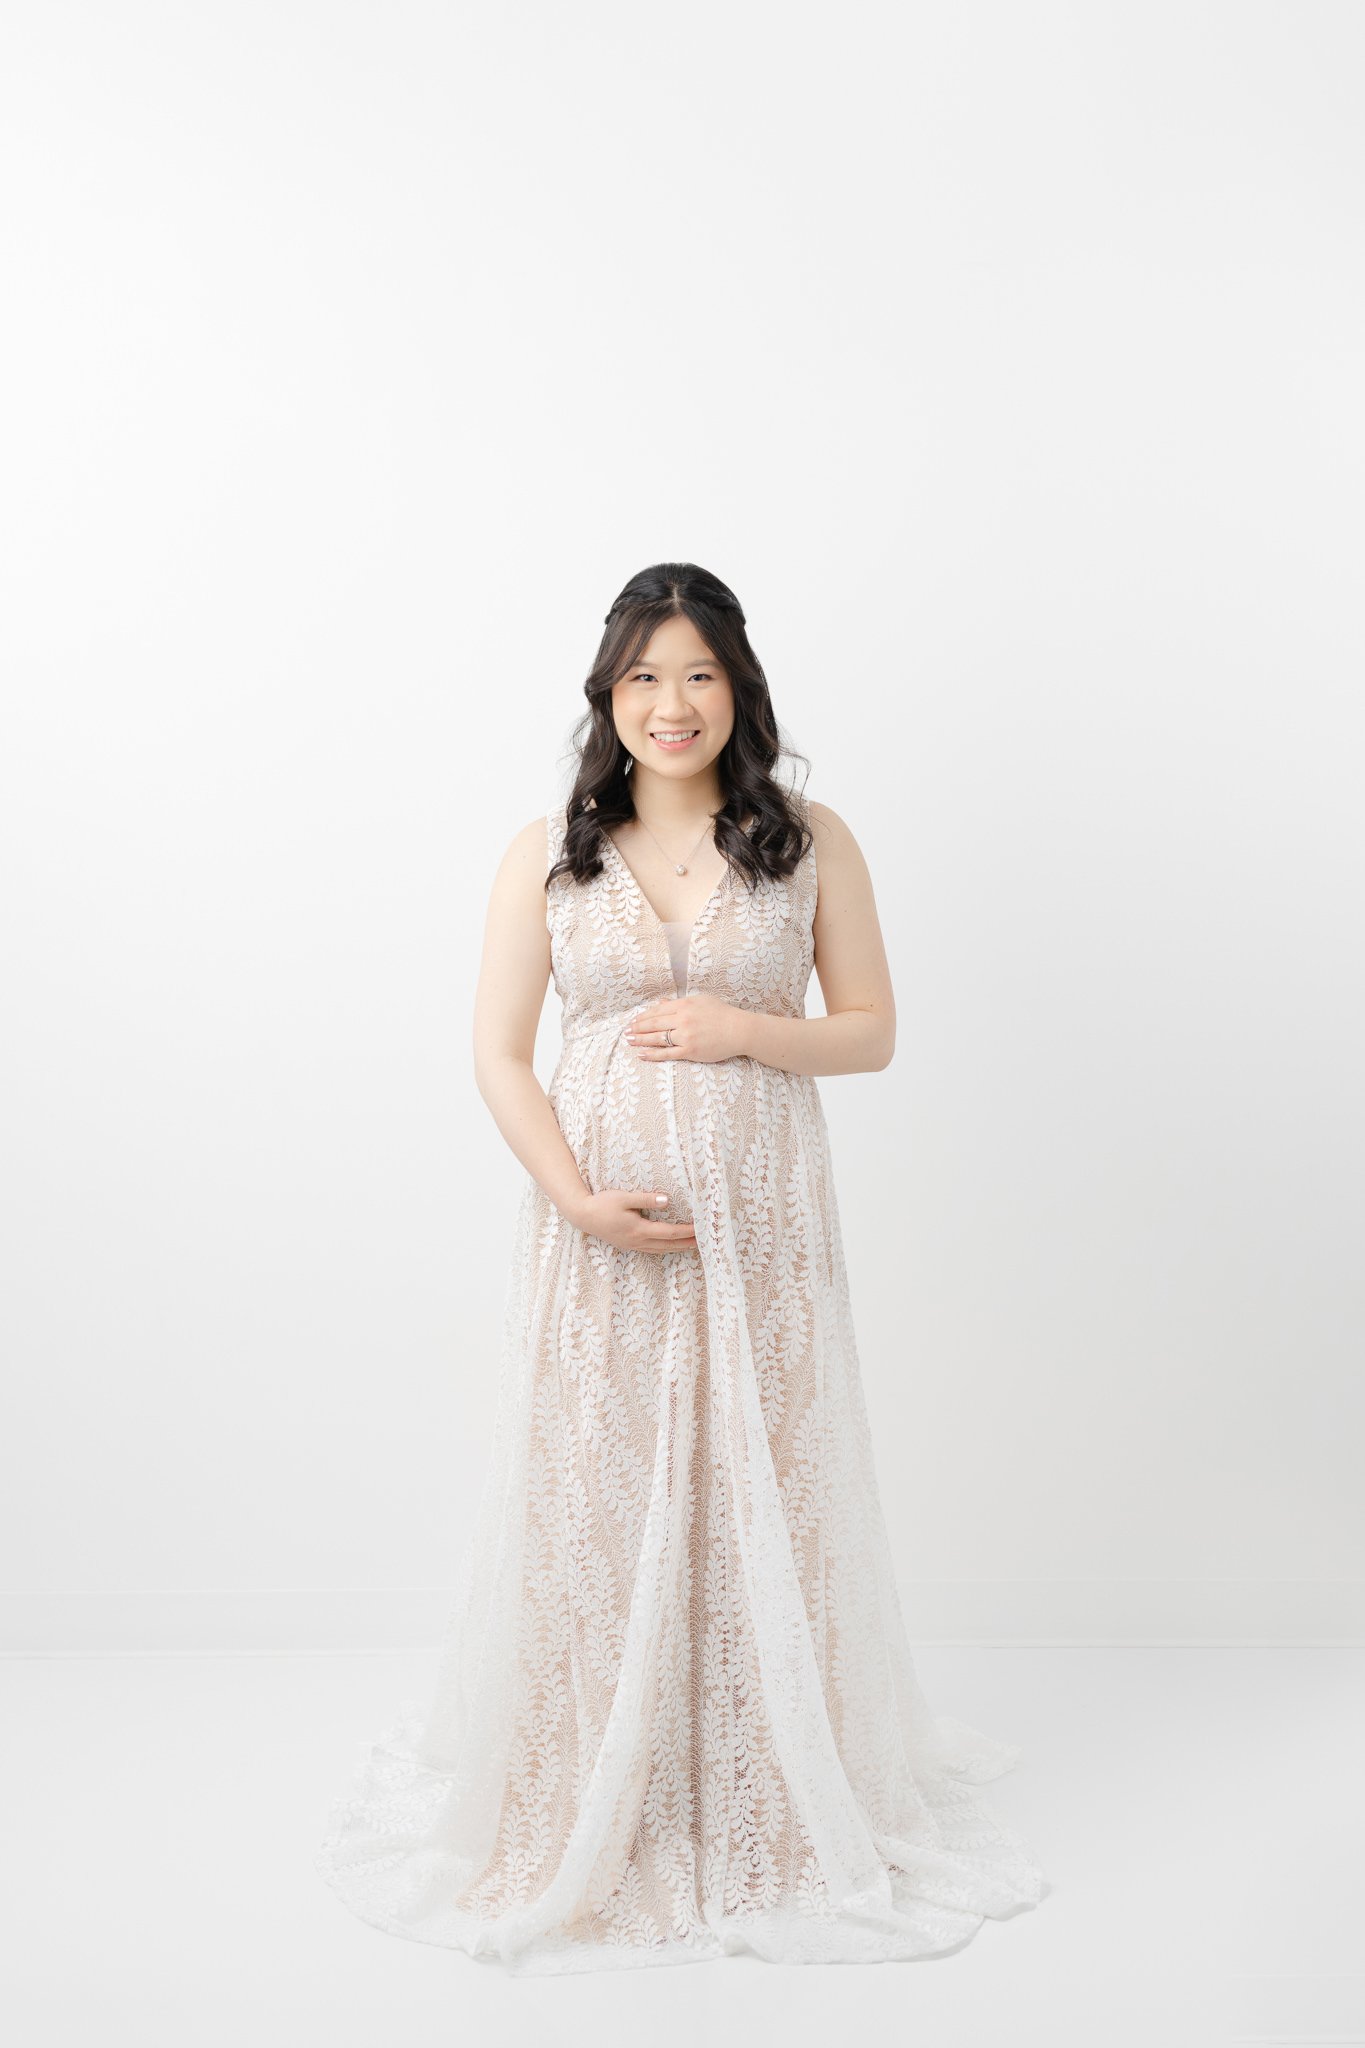  New Jersey maternity photographer Nicole Hawkins Photography captures a stunning portrait of a pregnant mother in a white gauzy gown. maternity portrait style ideas studio all white #NicoleHawkinsPhotography #NicoleHawkinsMaternity #MaternityPhotogr